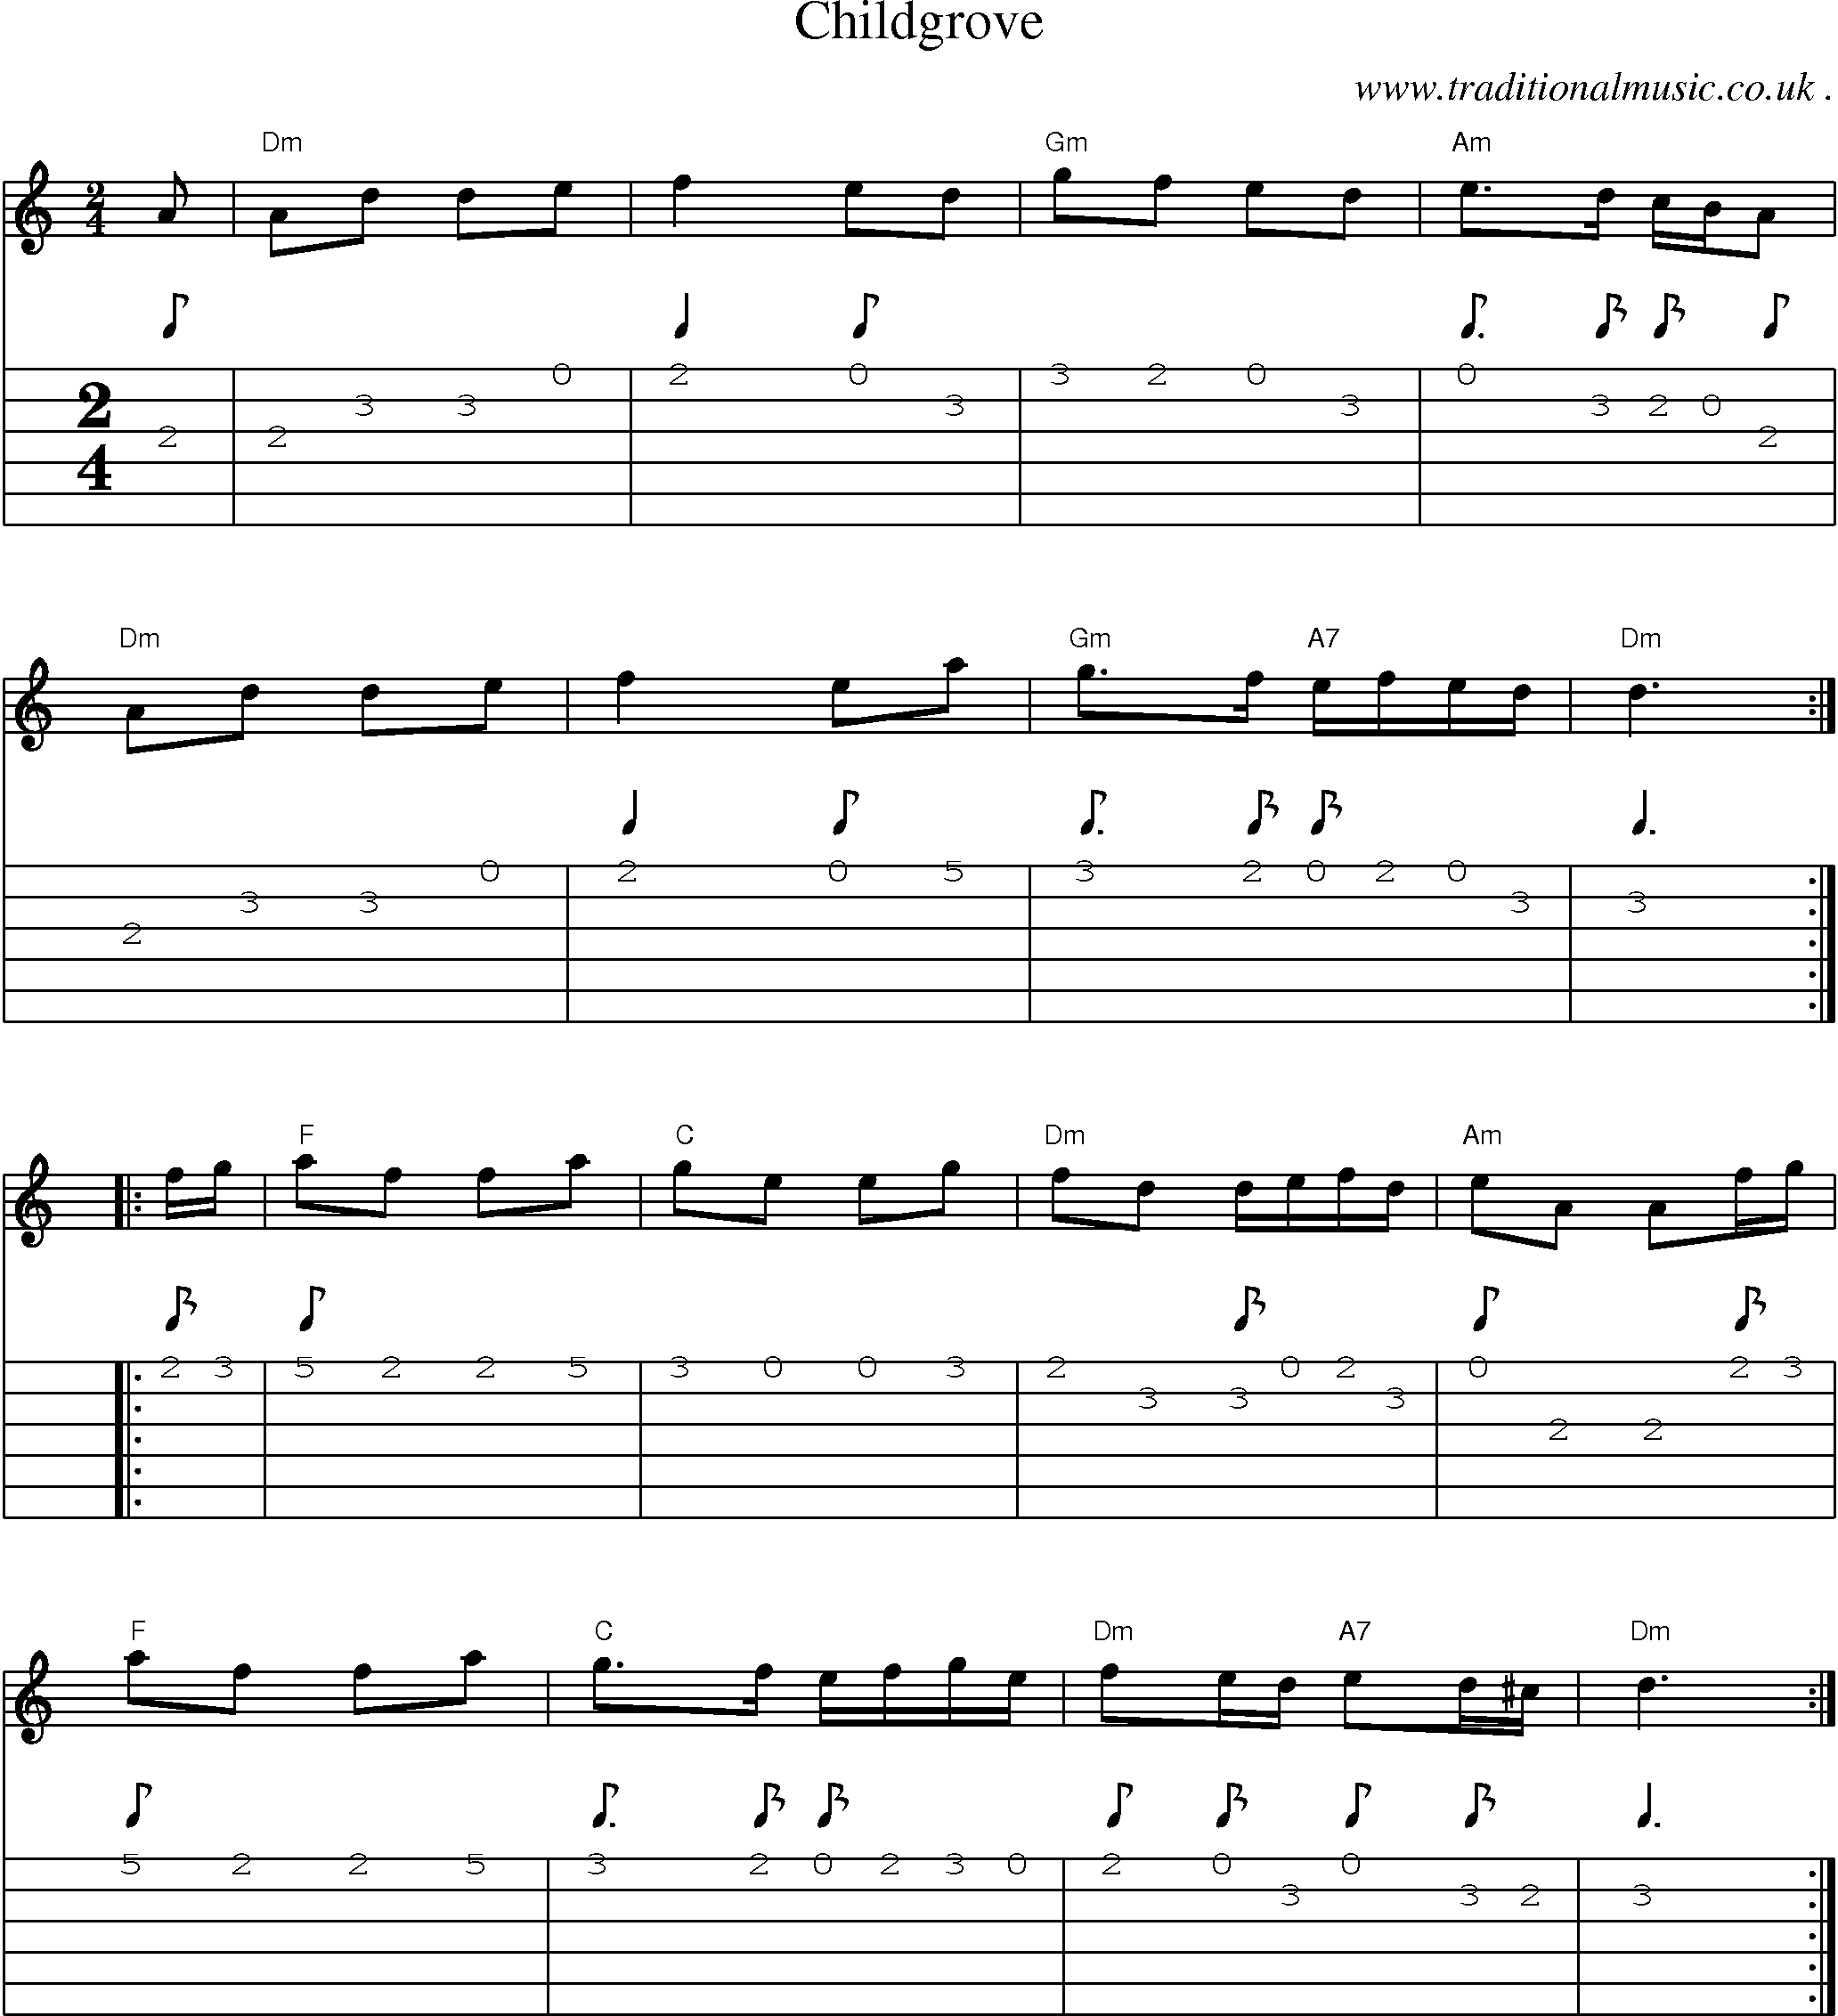 Music Score and Guitar Tabs for Childgrove